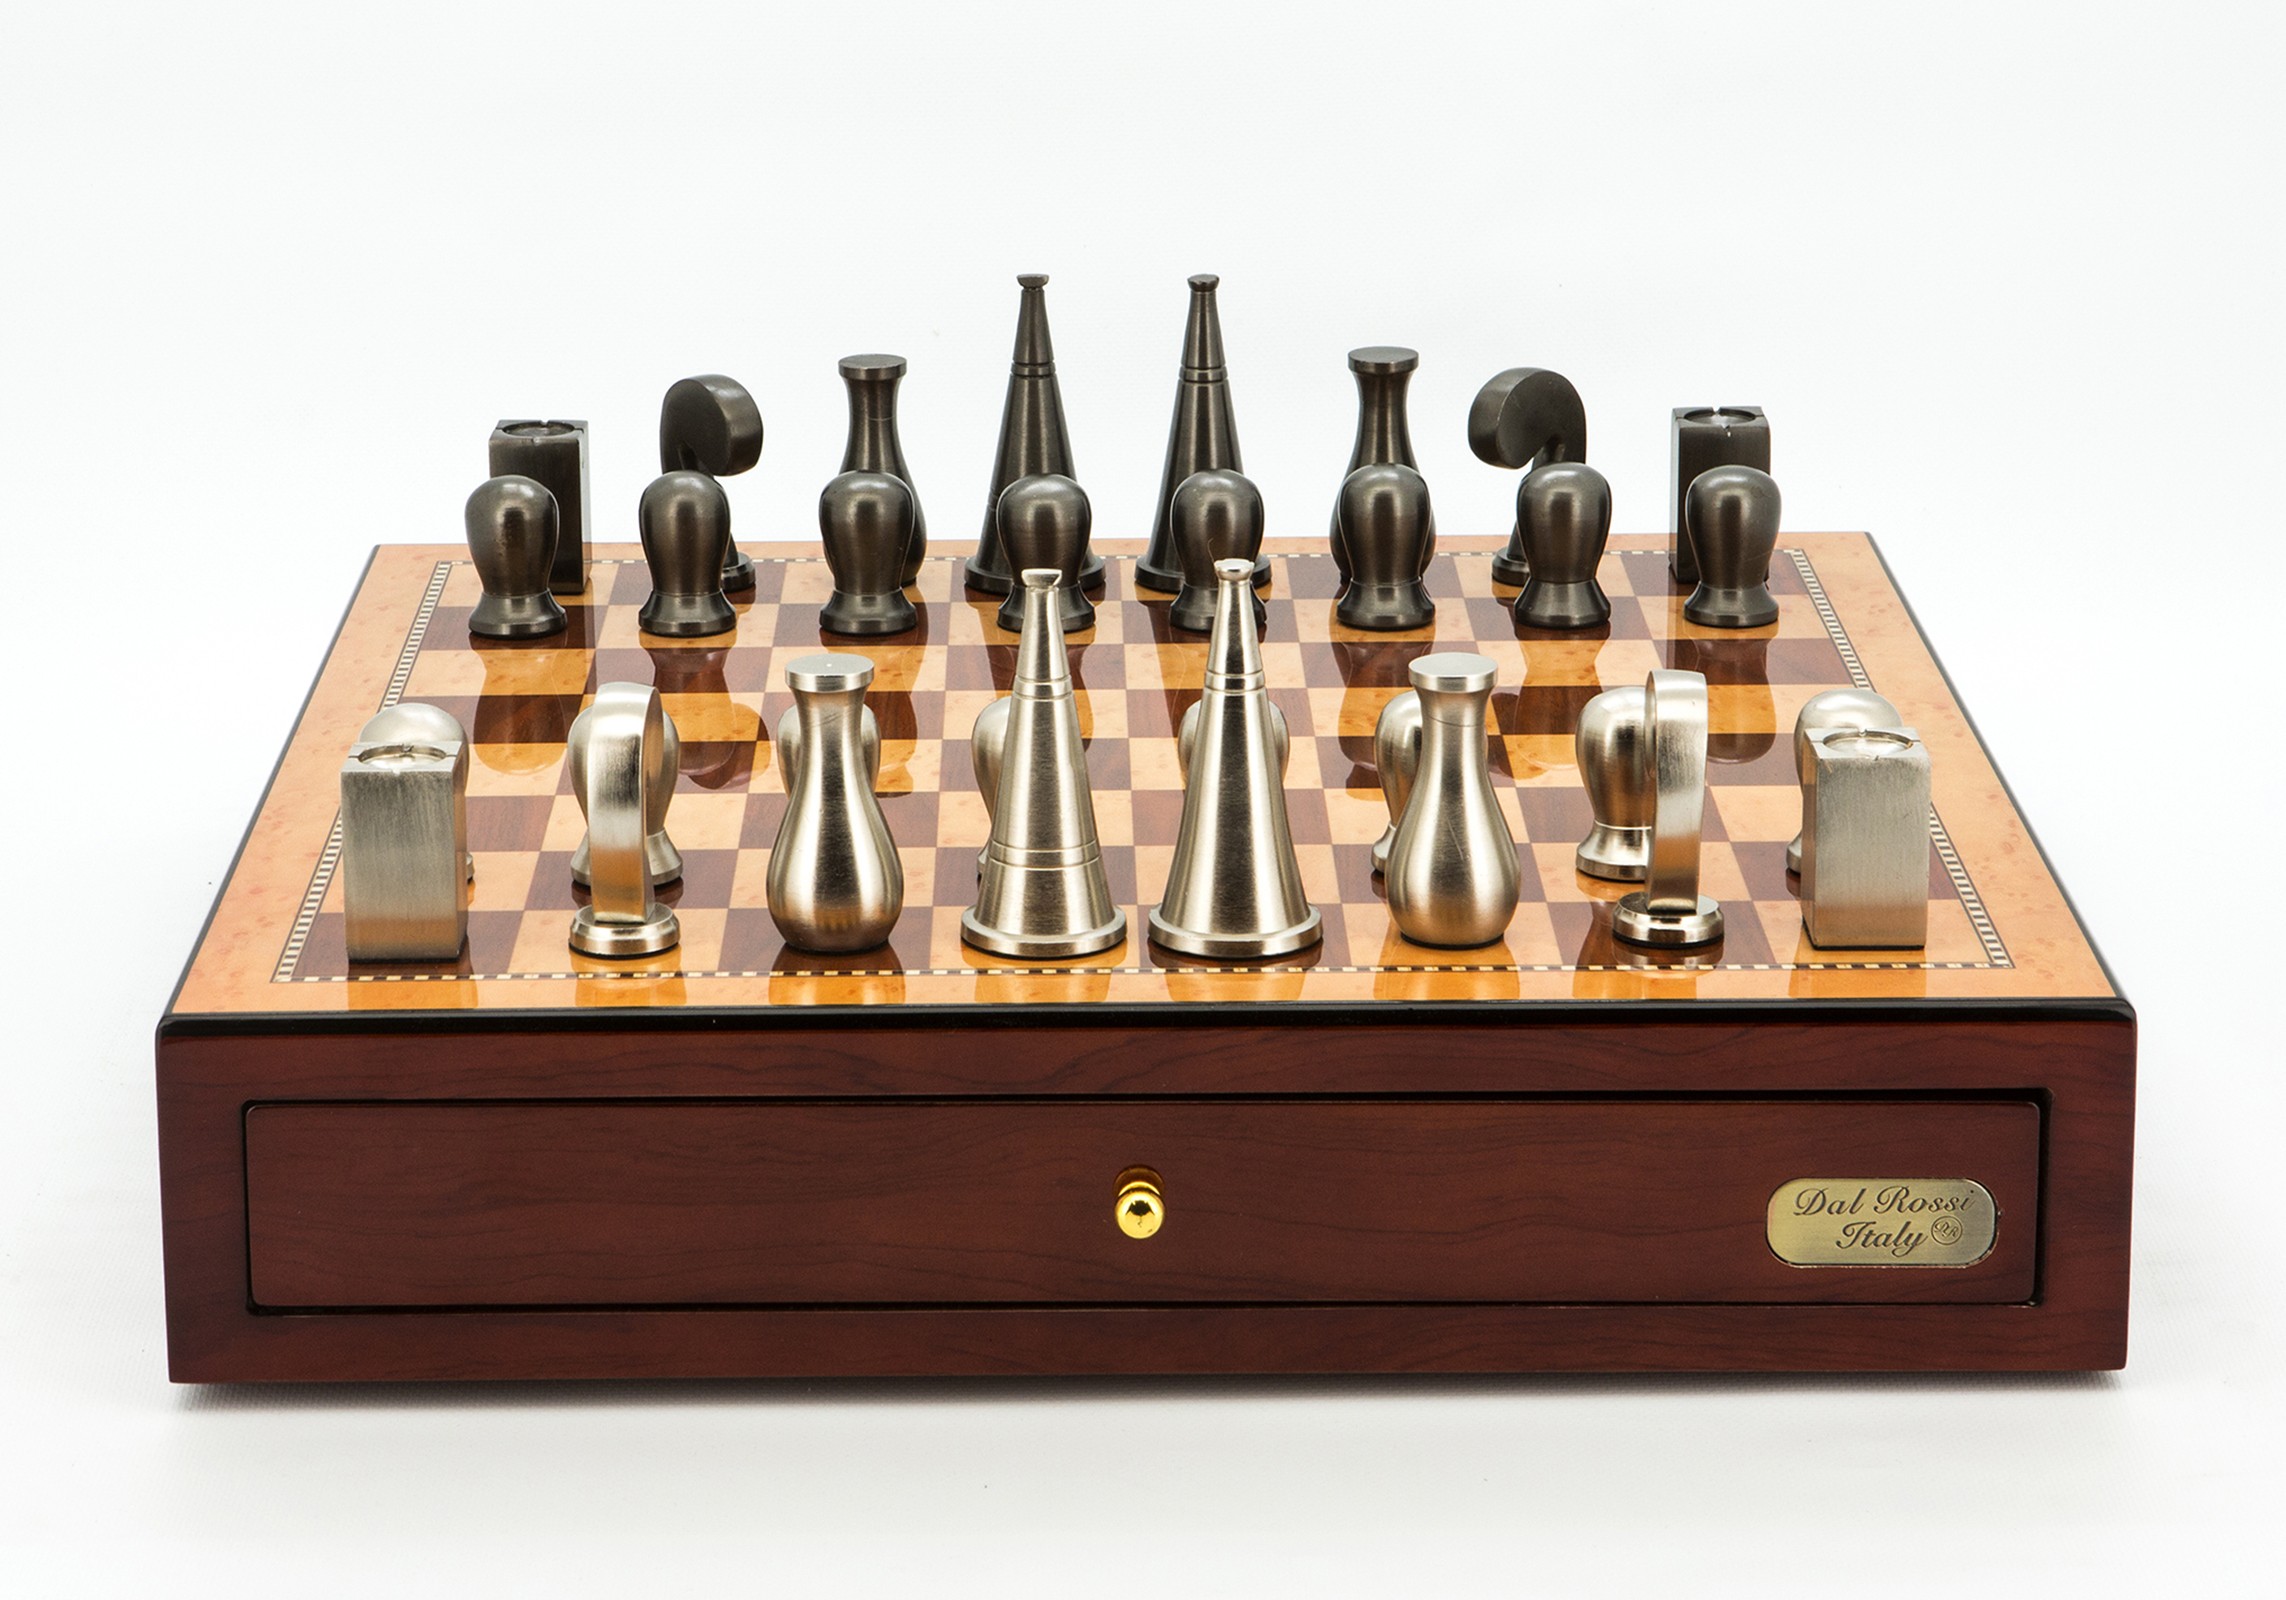 Dal Rossi Italy Chess Set Mahogany Finish 18", With Metal Dark Titanium and Silver 90mm Chessmen